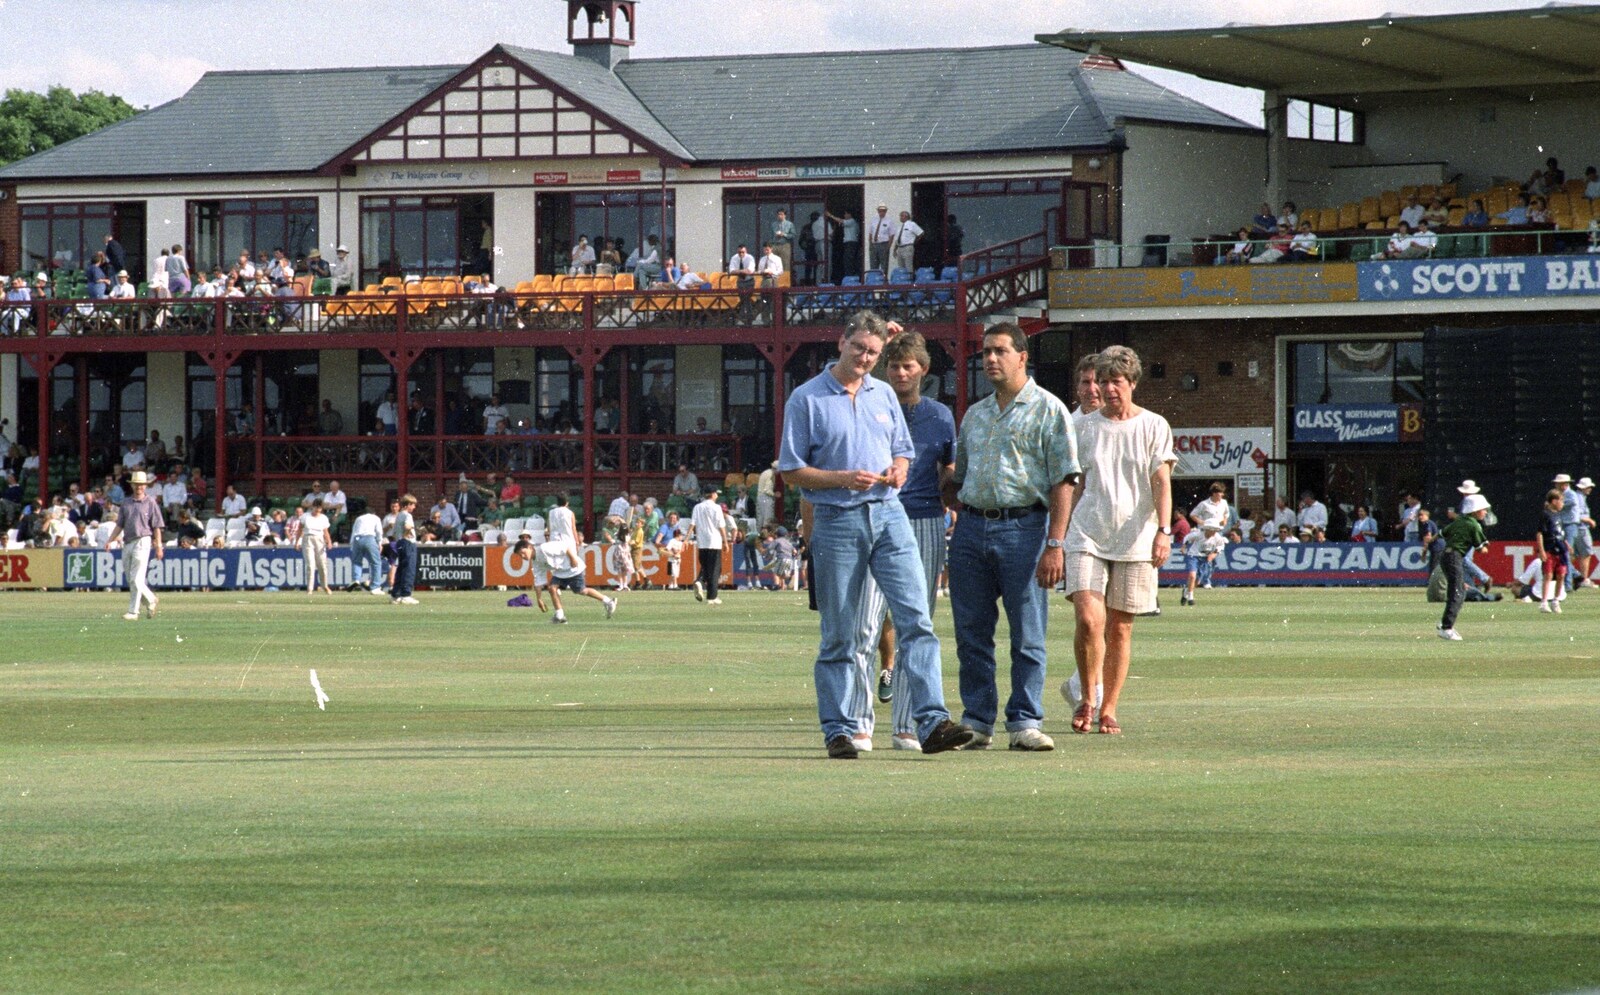 Graham, Pippa and Roger mill around from A Spot of Cricket, Northampton - 5th September 1994